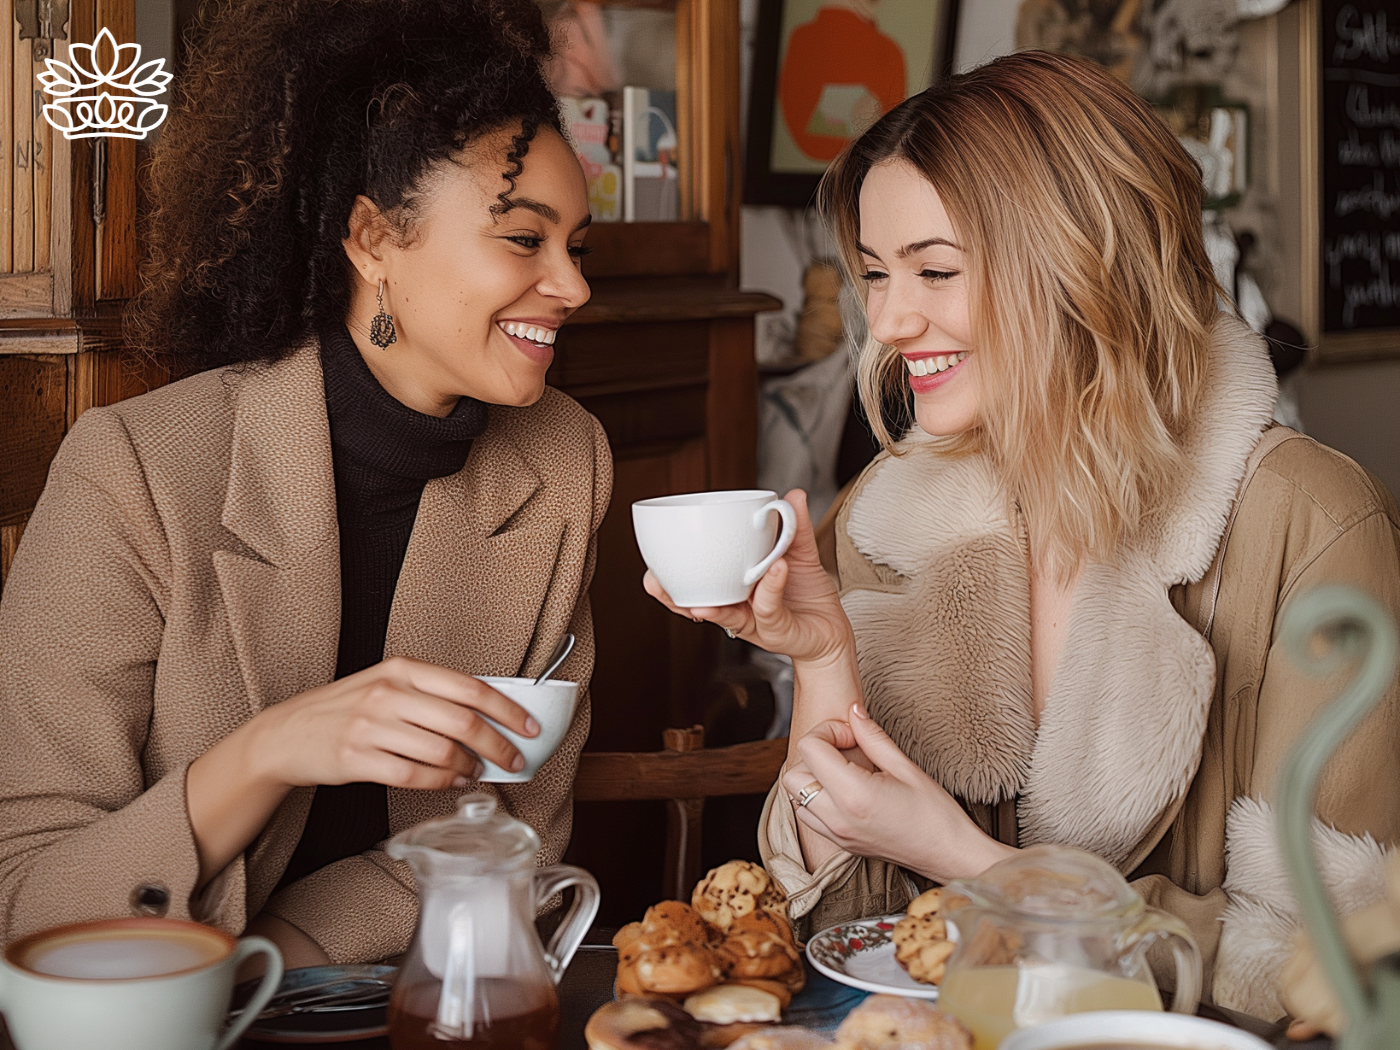 Two friends sharing a joyful moment over coffee, biscuits and pastries in a cosy café, embodying the warm atmosphere of Fabulous Flowers and Gifts.